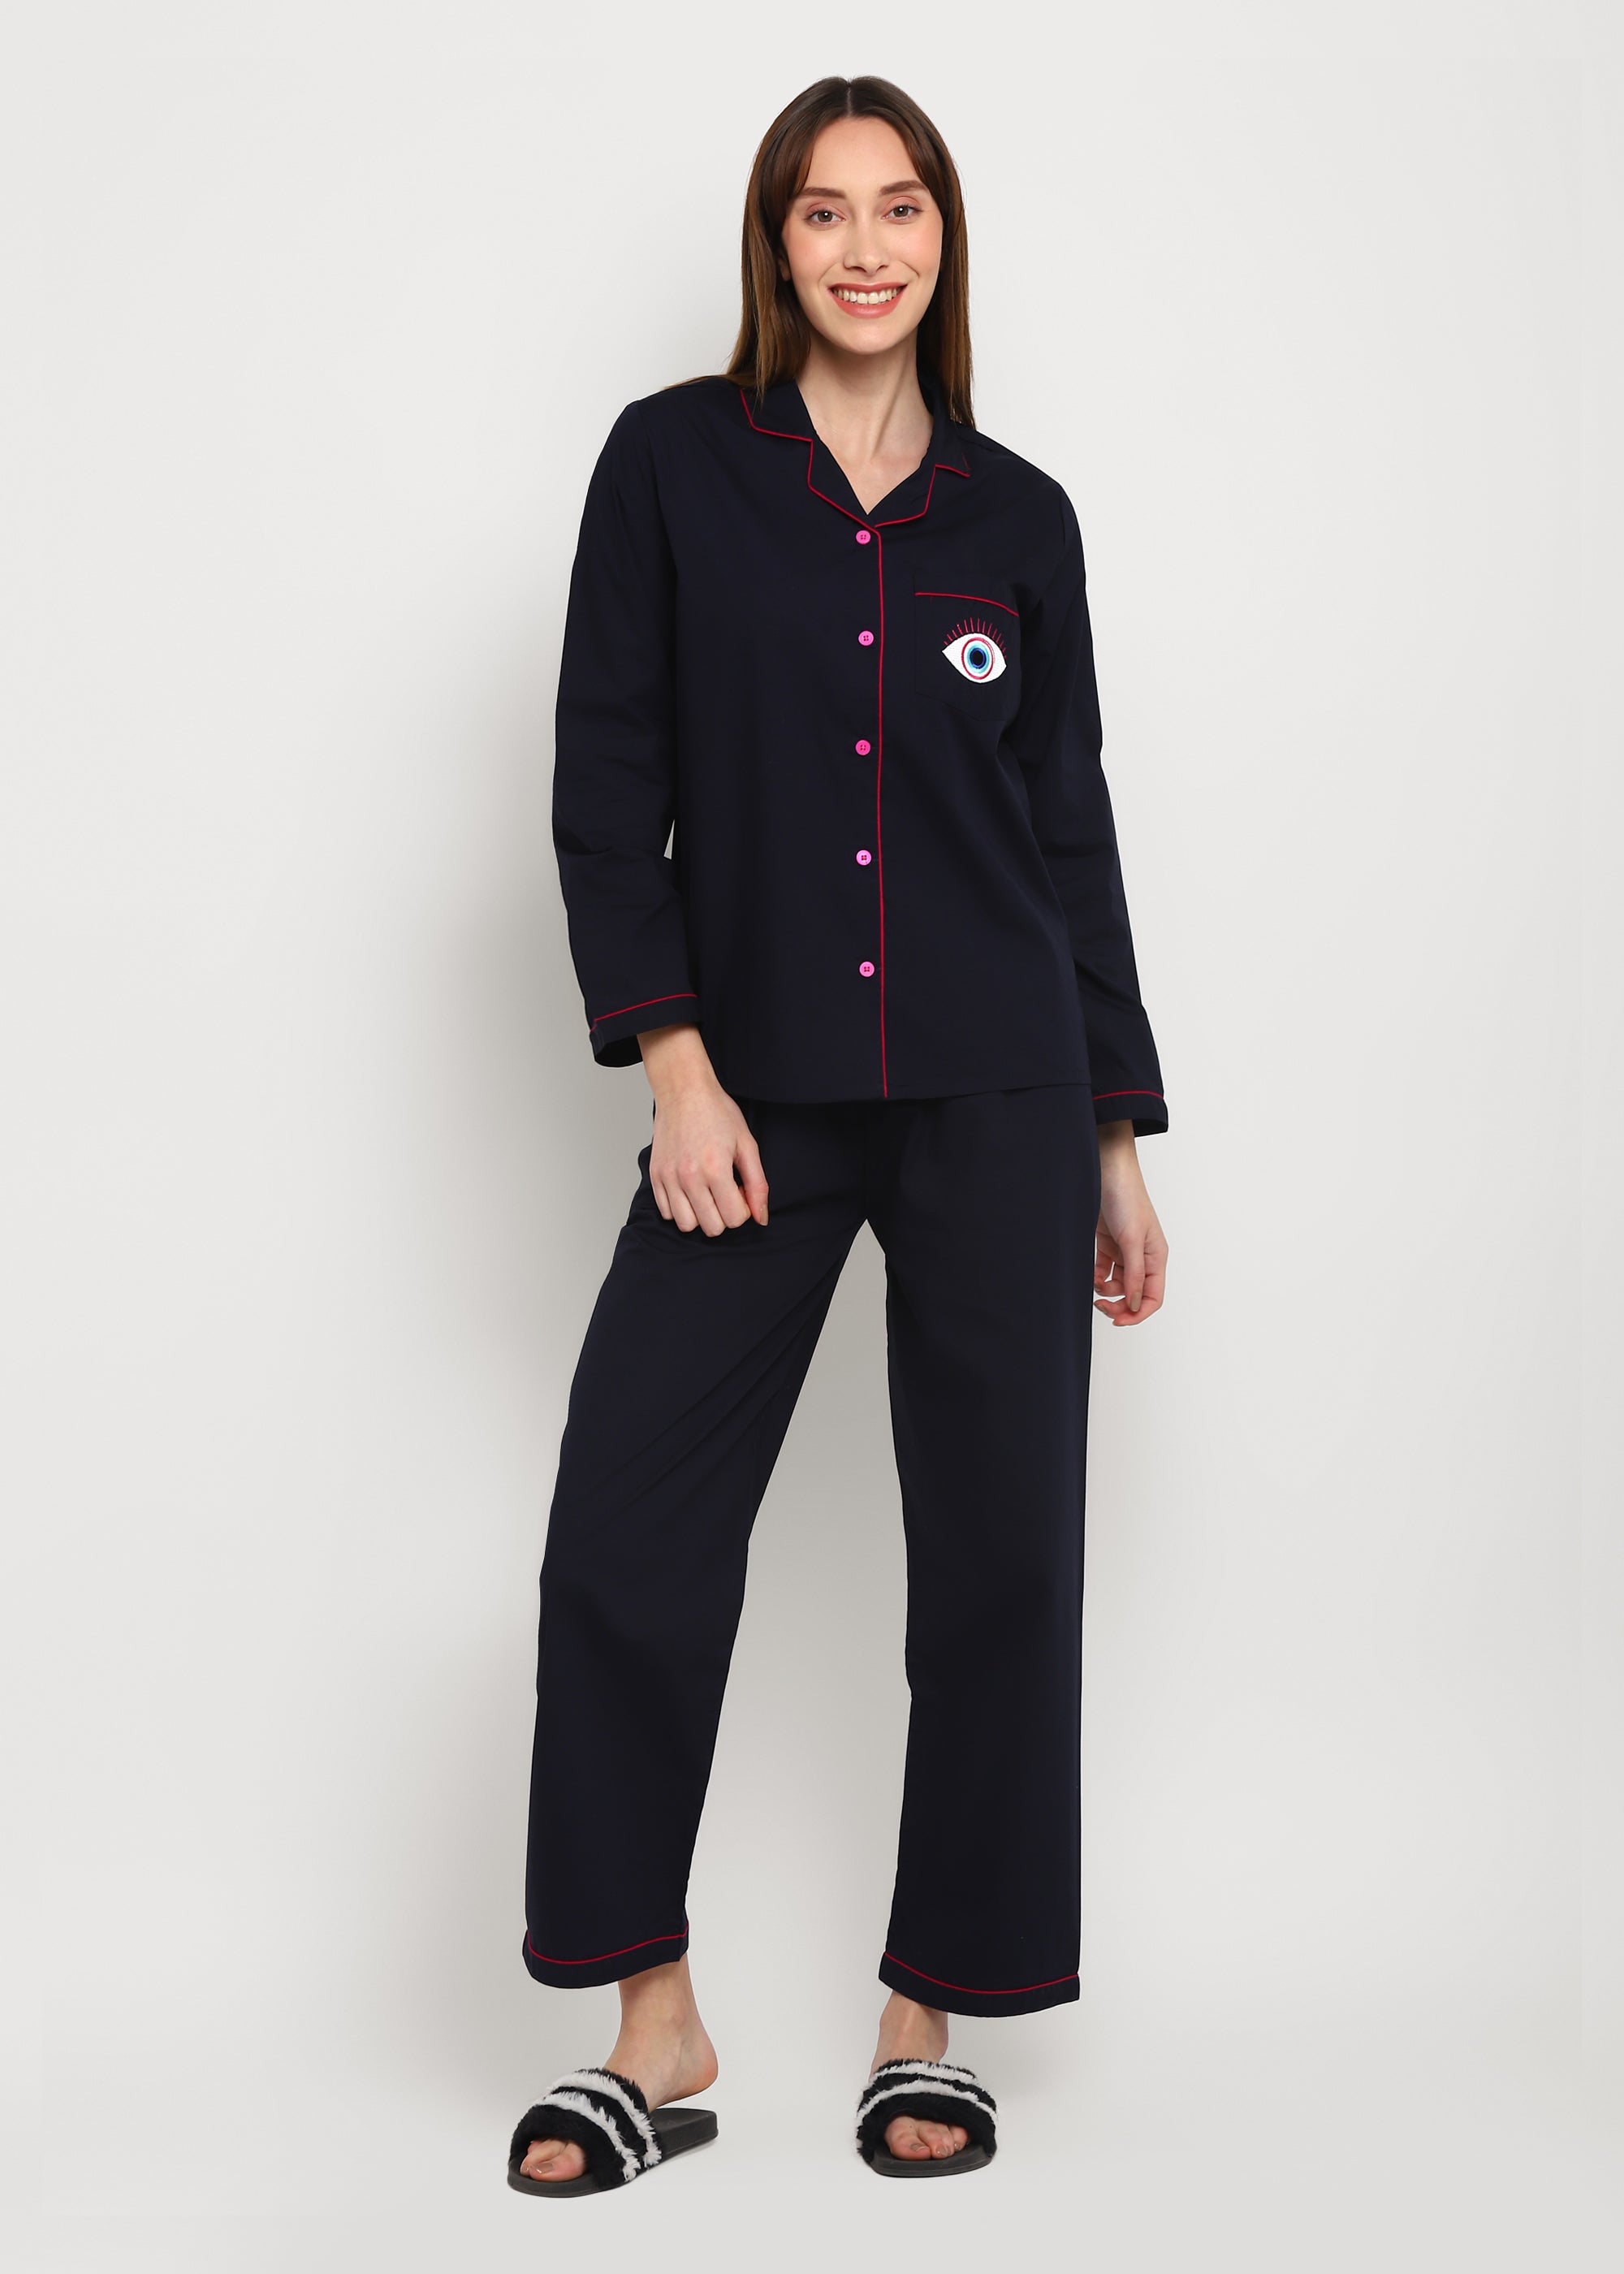 Pink Embroidered Big Evil Eye Long Sleeve Women's Night Suit - Shopbloom